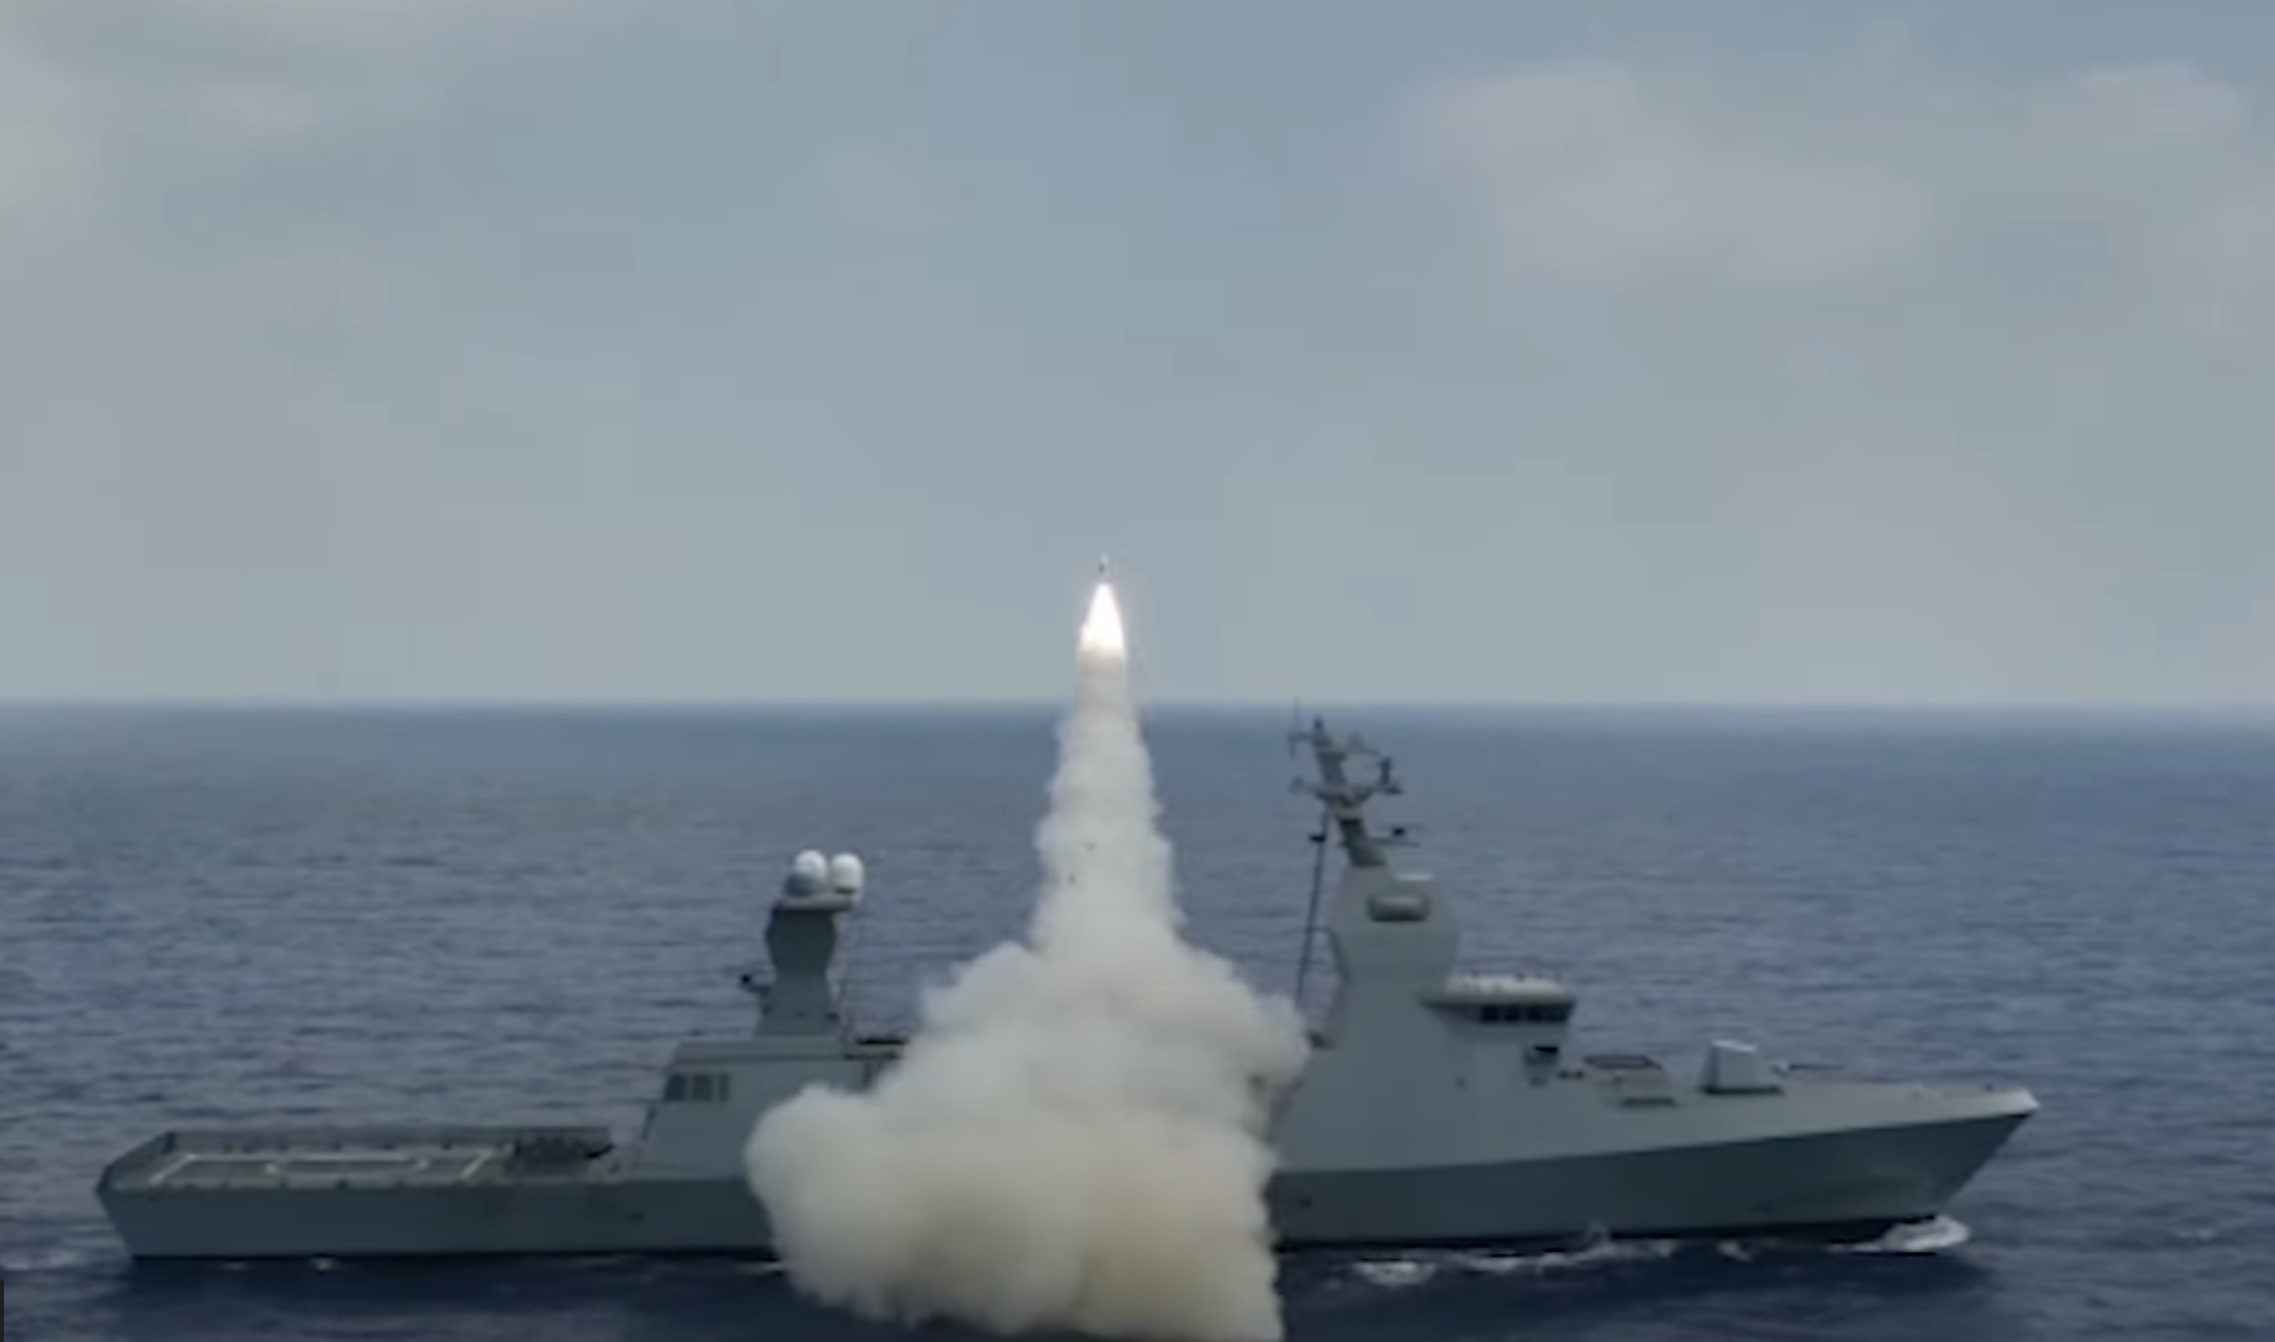 Israel's Sa’ar 6-class corvette INS Oz launches Gabriel V missile that destroyed a mock ship target